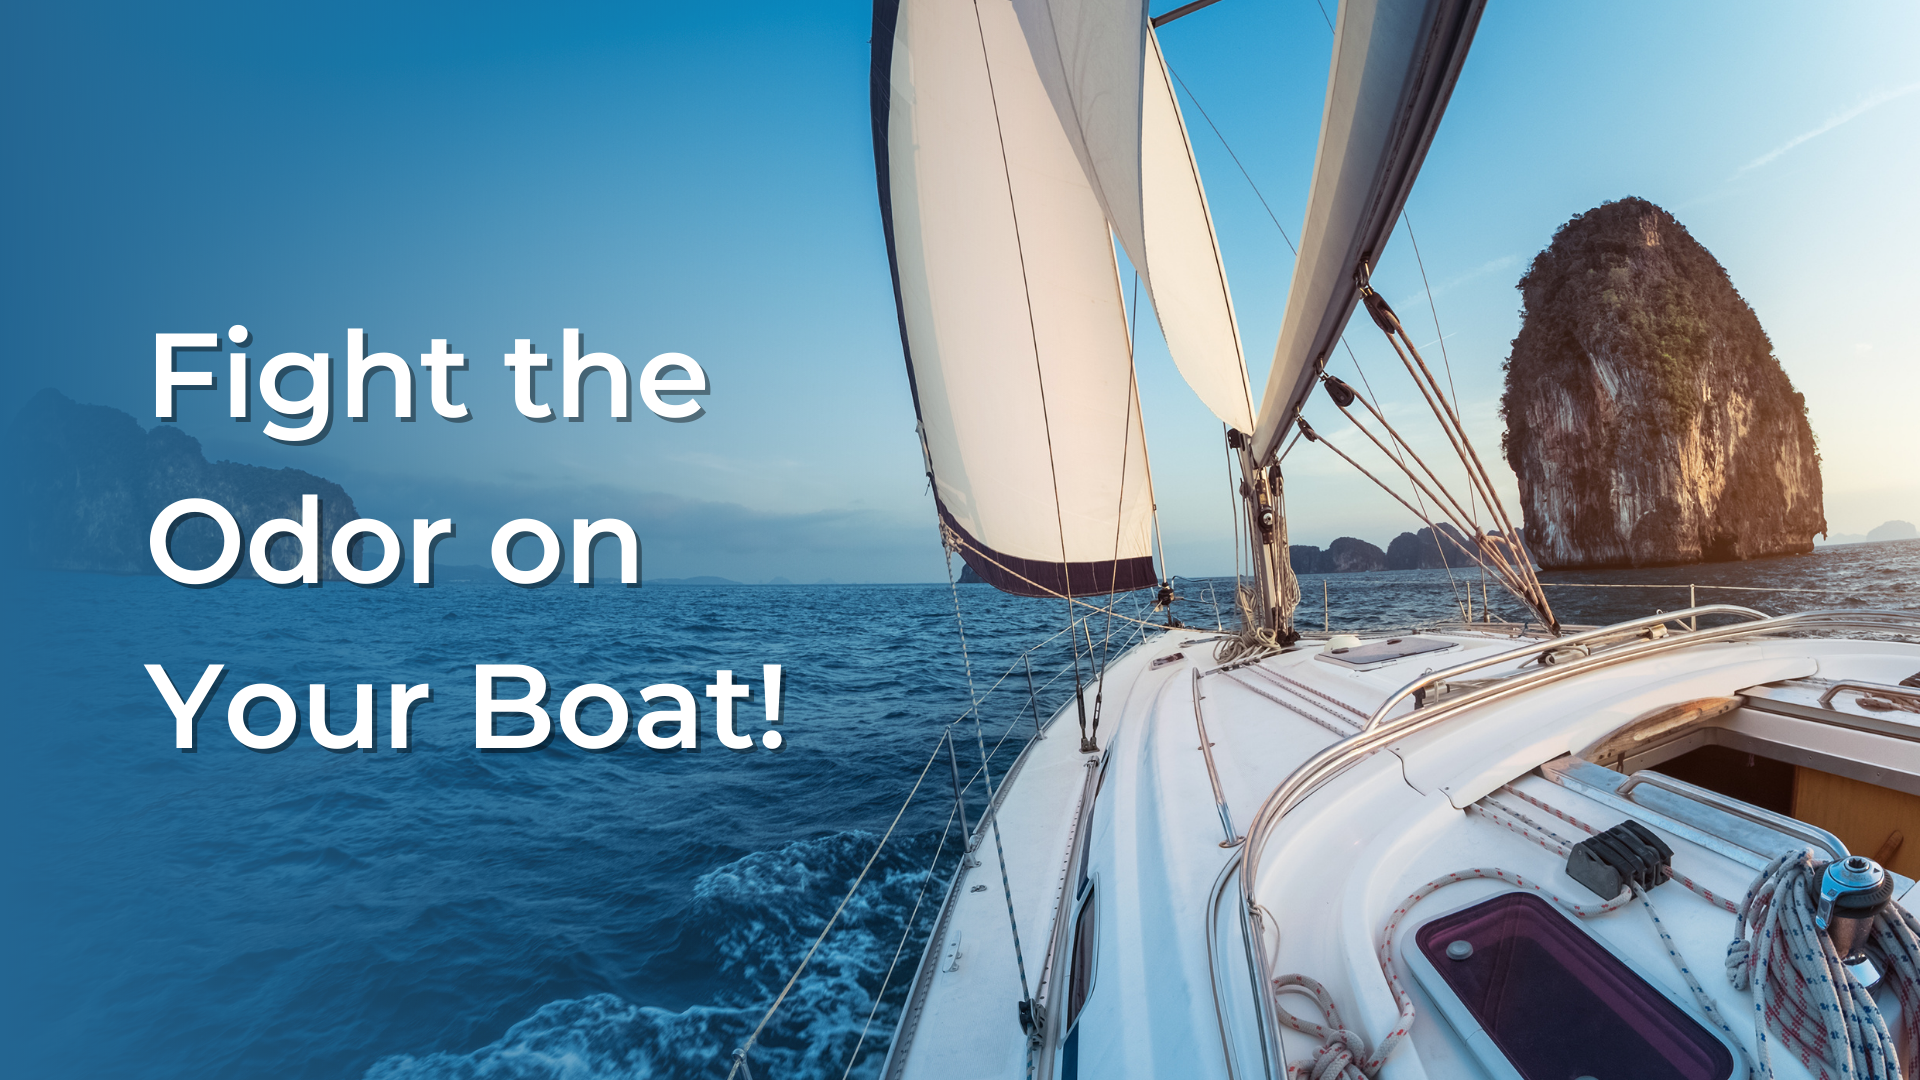 5 Products from Raritan to Fight the Odor on Your Boat